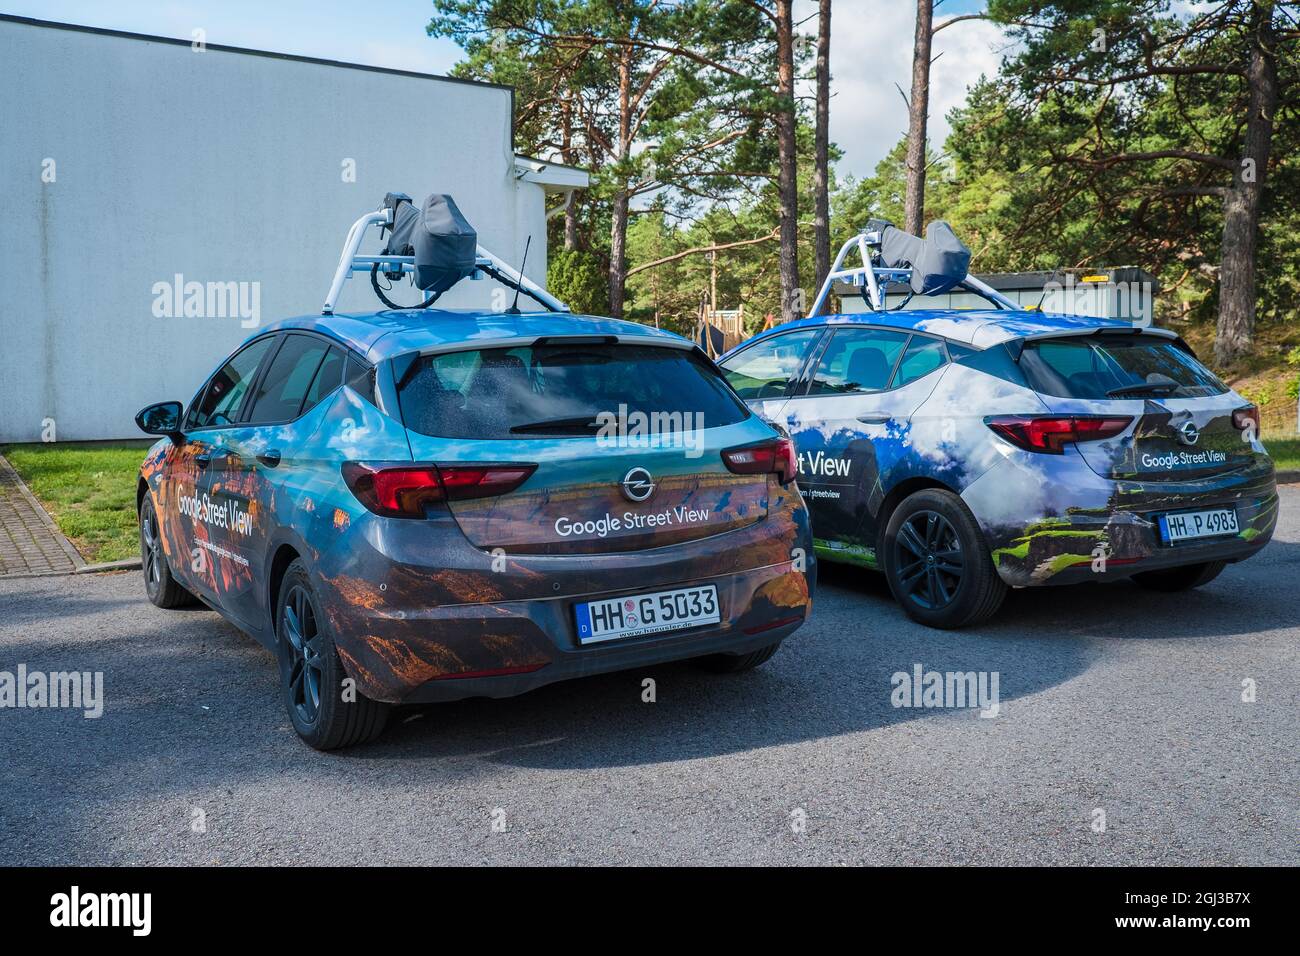 Two Google Street View cars parked in rural location. Google map vehicles are mapping roads worldwide. Stock Photo